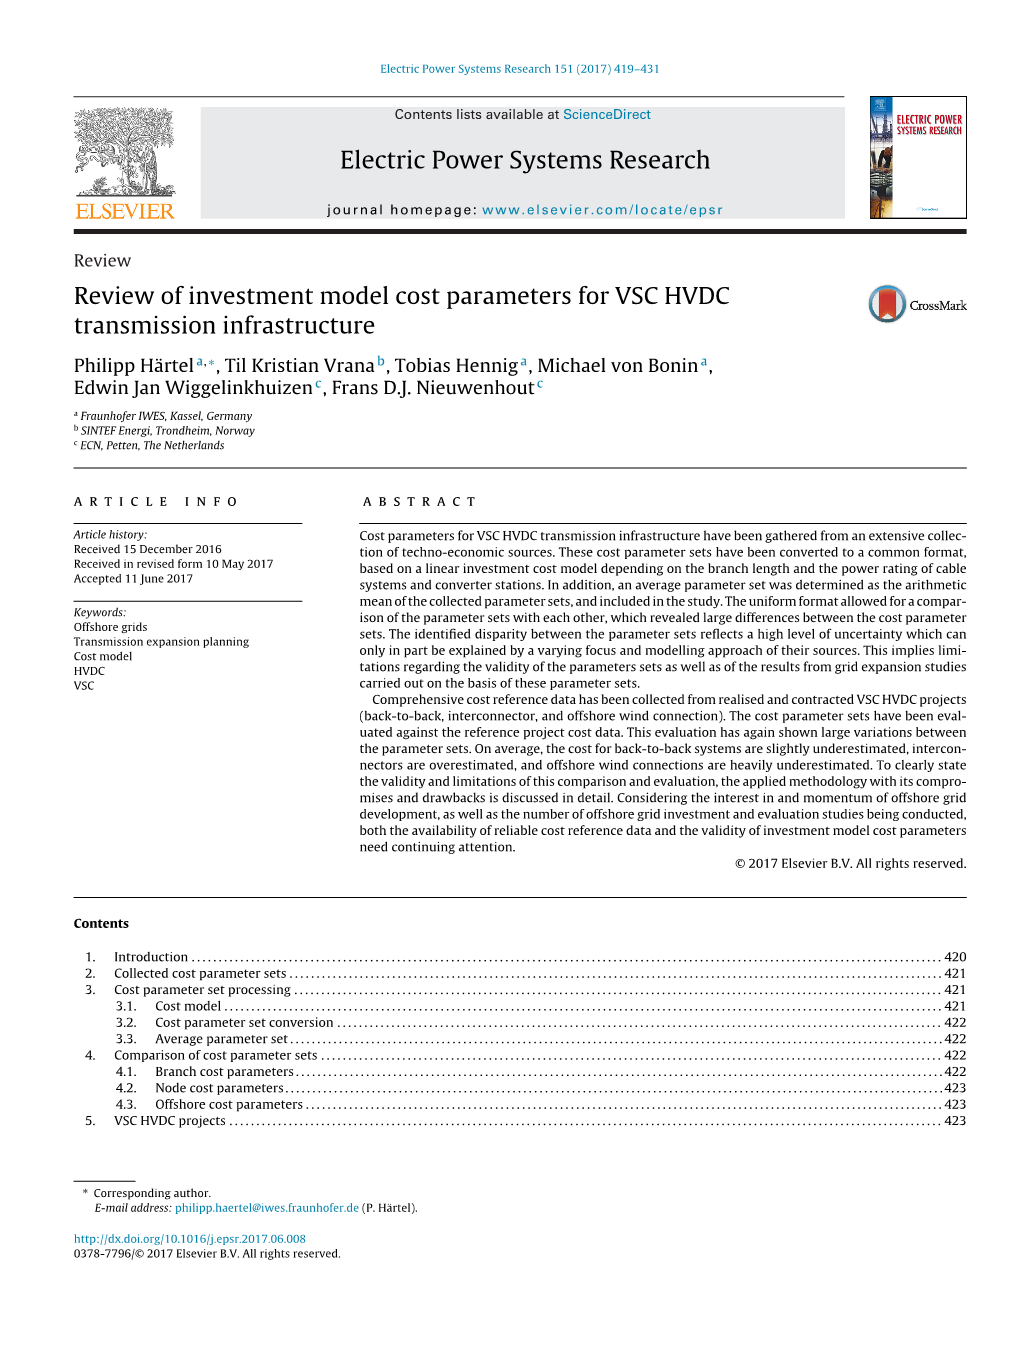 Review of Investment Model Cost Parameters for VSC HVDC